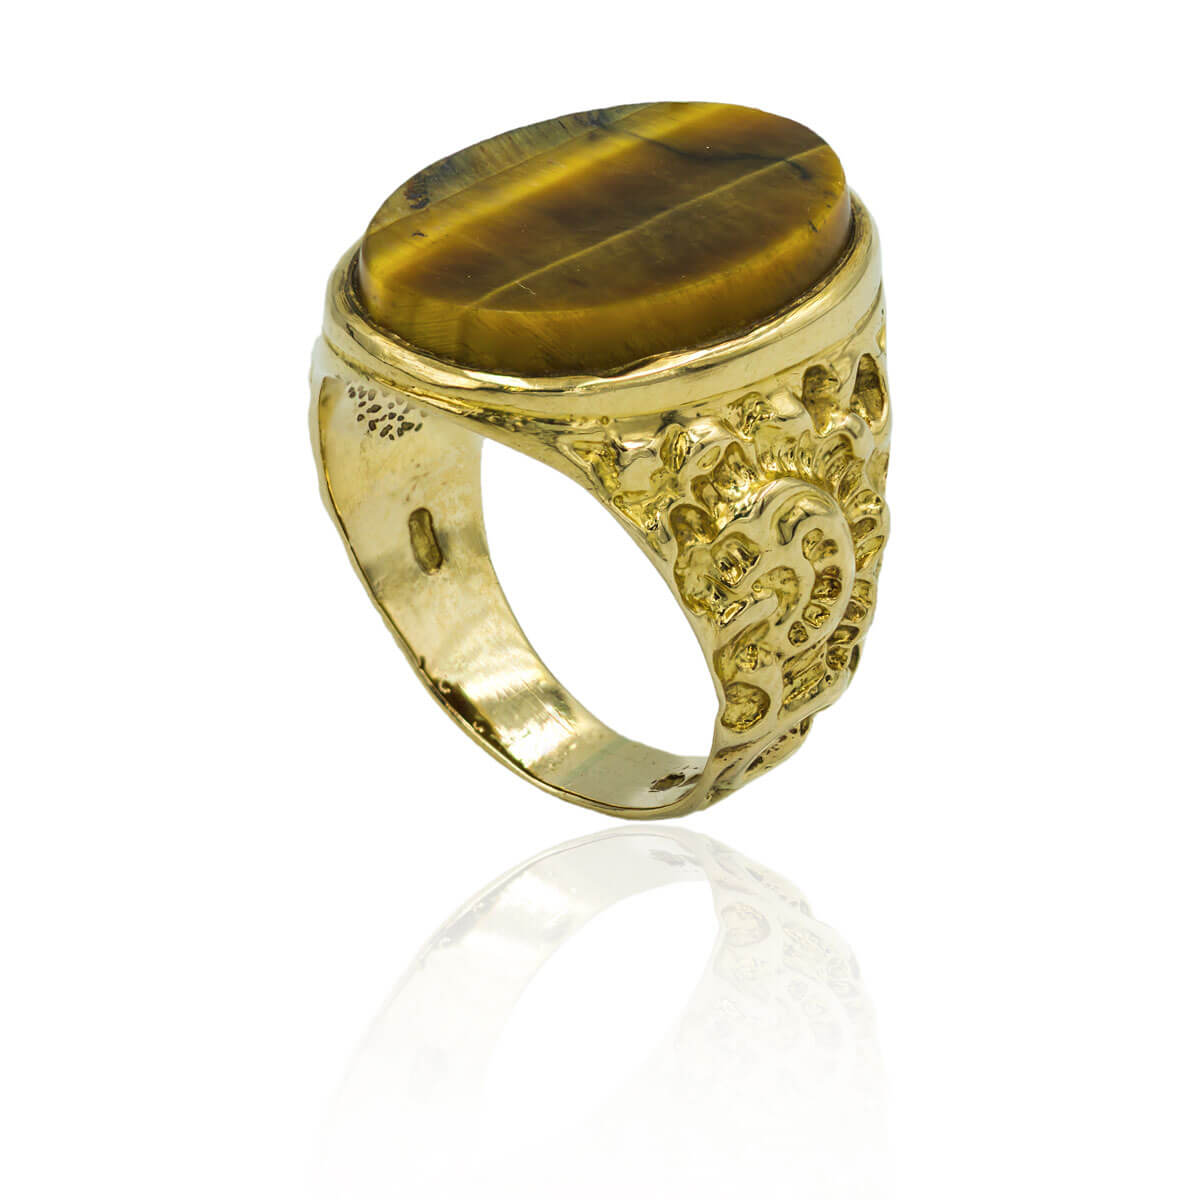 What is 9ct gold jewellery?